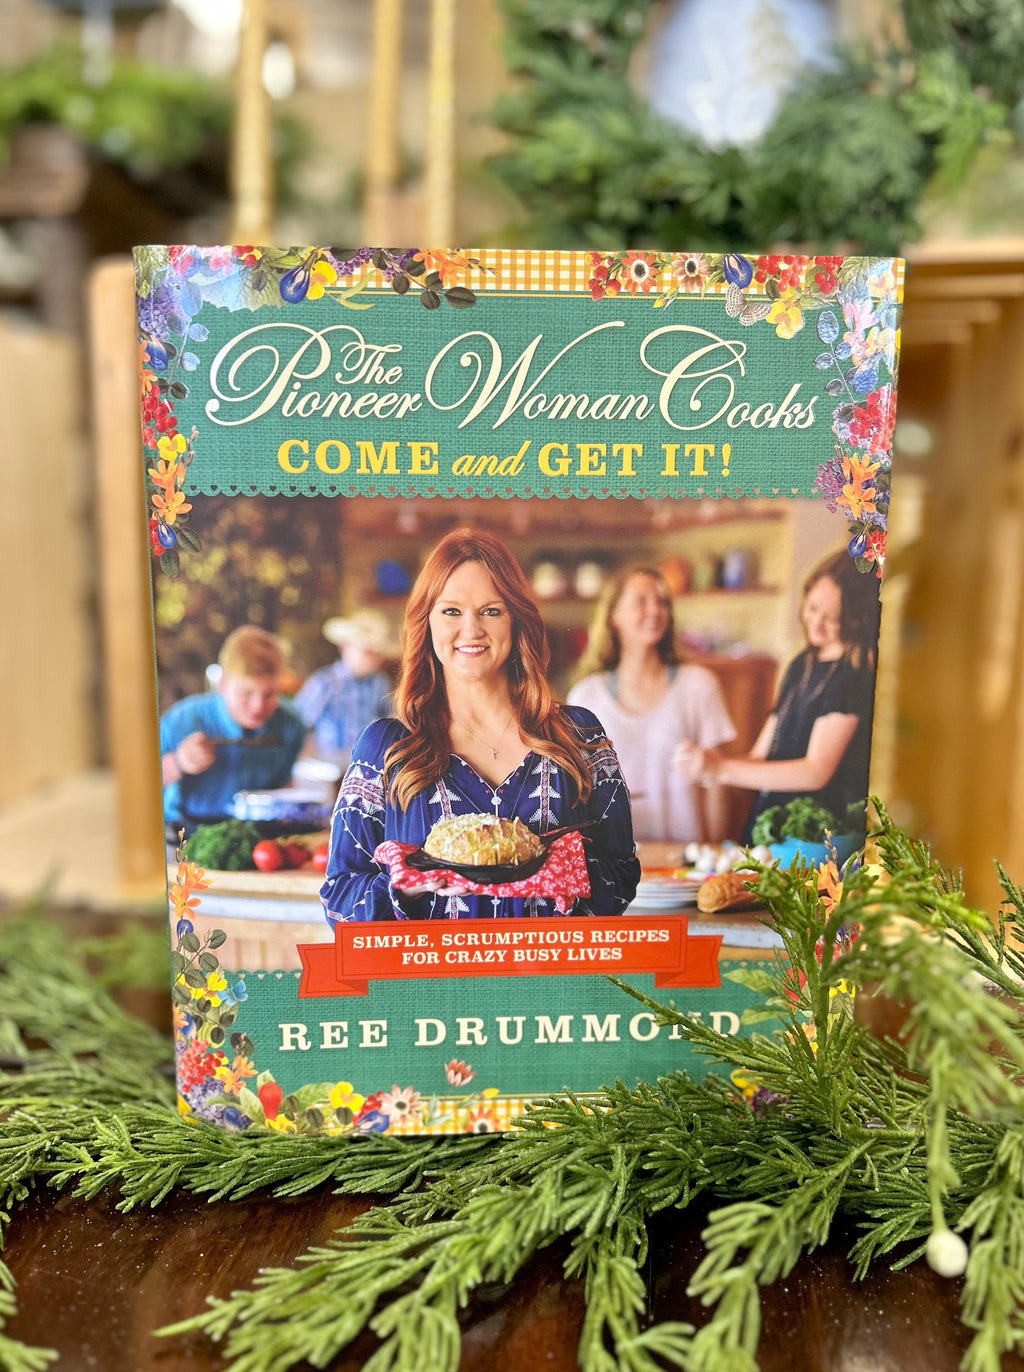 The Pioneer Woman Cooks - Come and Get It Cookbook